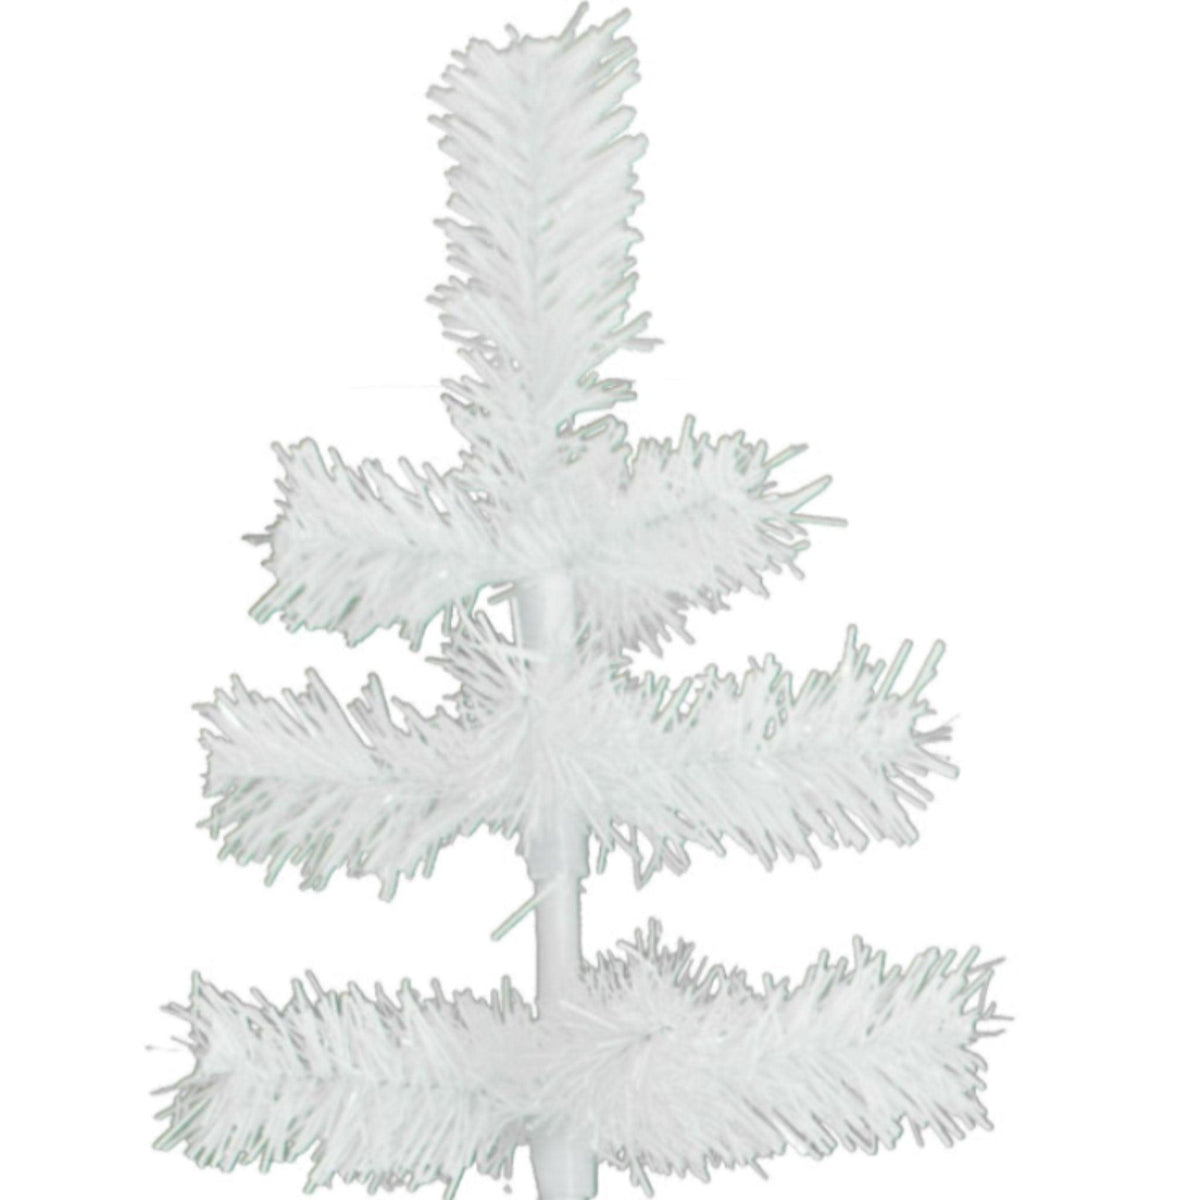 Top of the 3FT Tall White Tinsel Christmas Tree at Lee Display